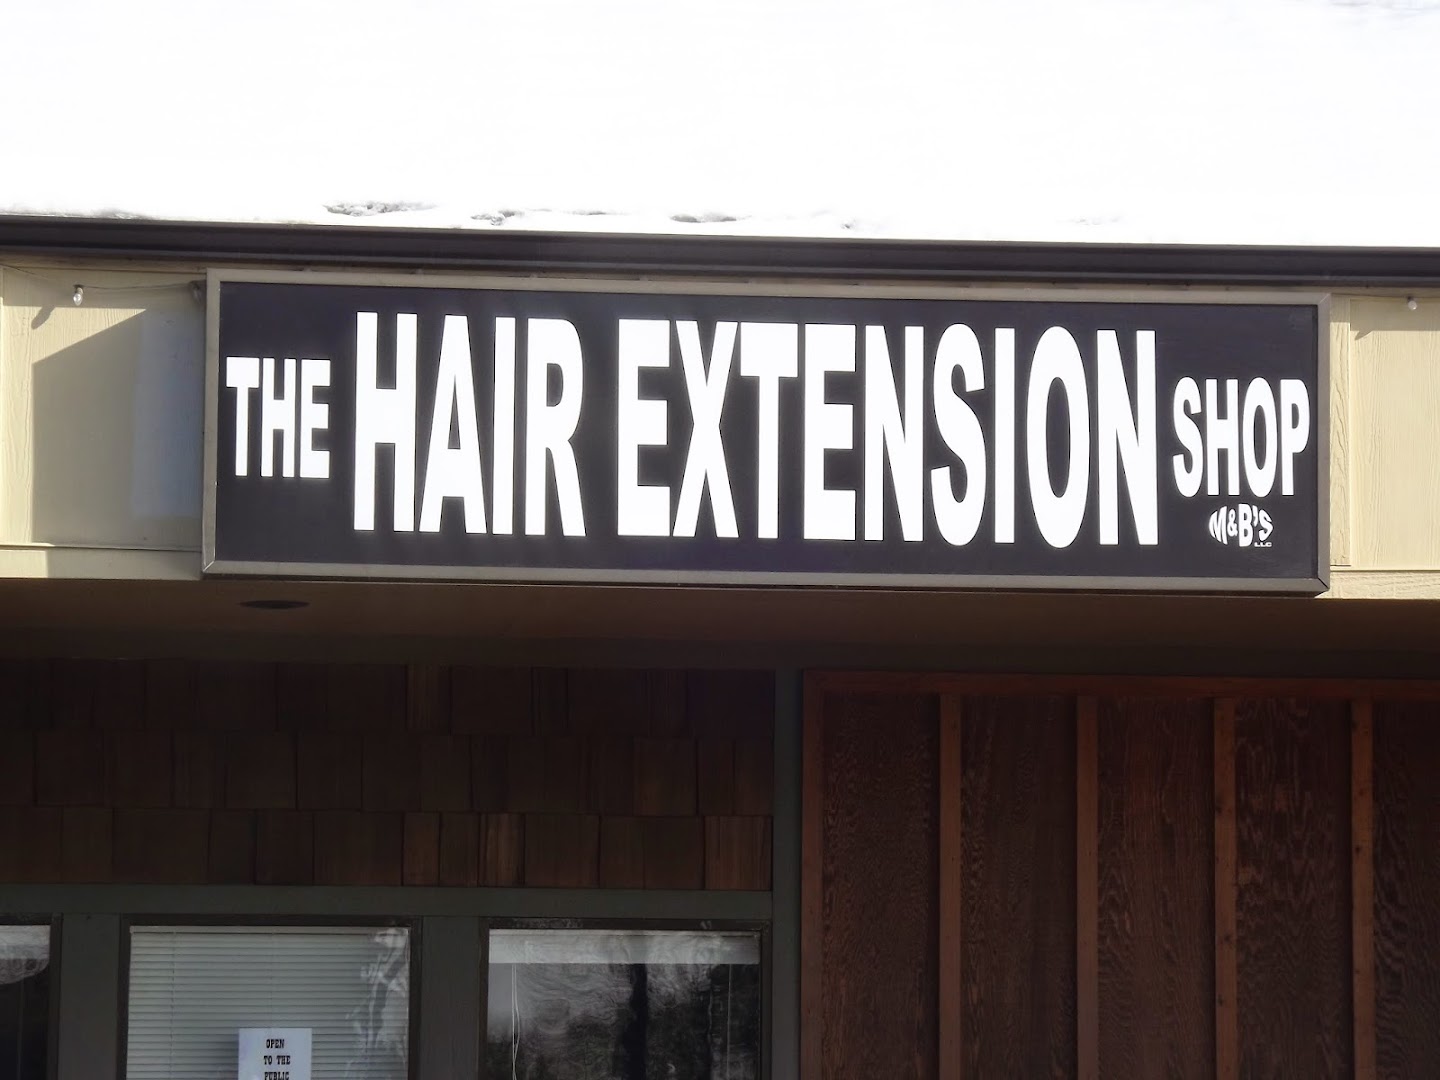 The Hair Extension Shop